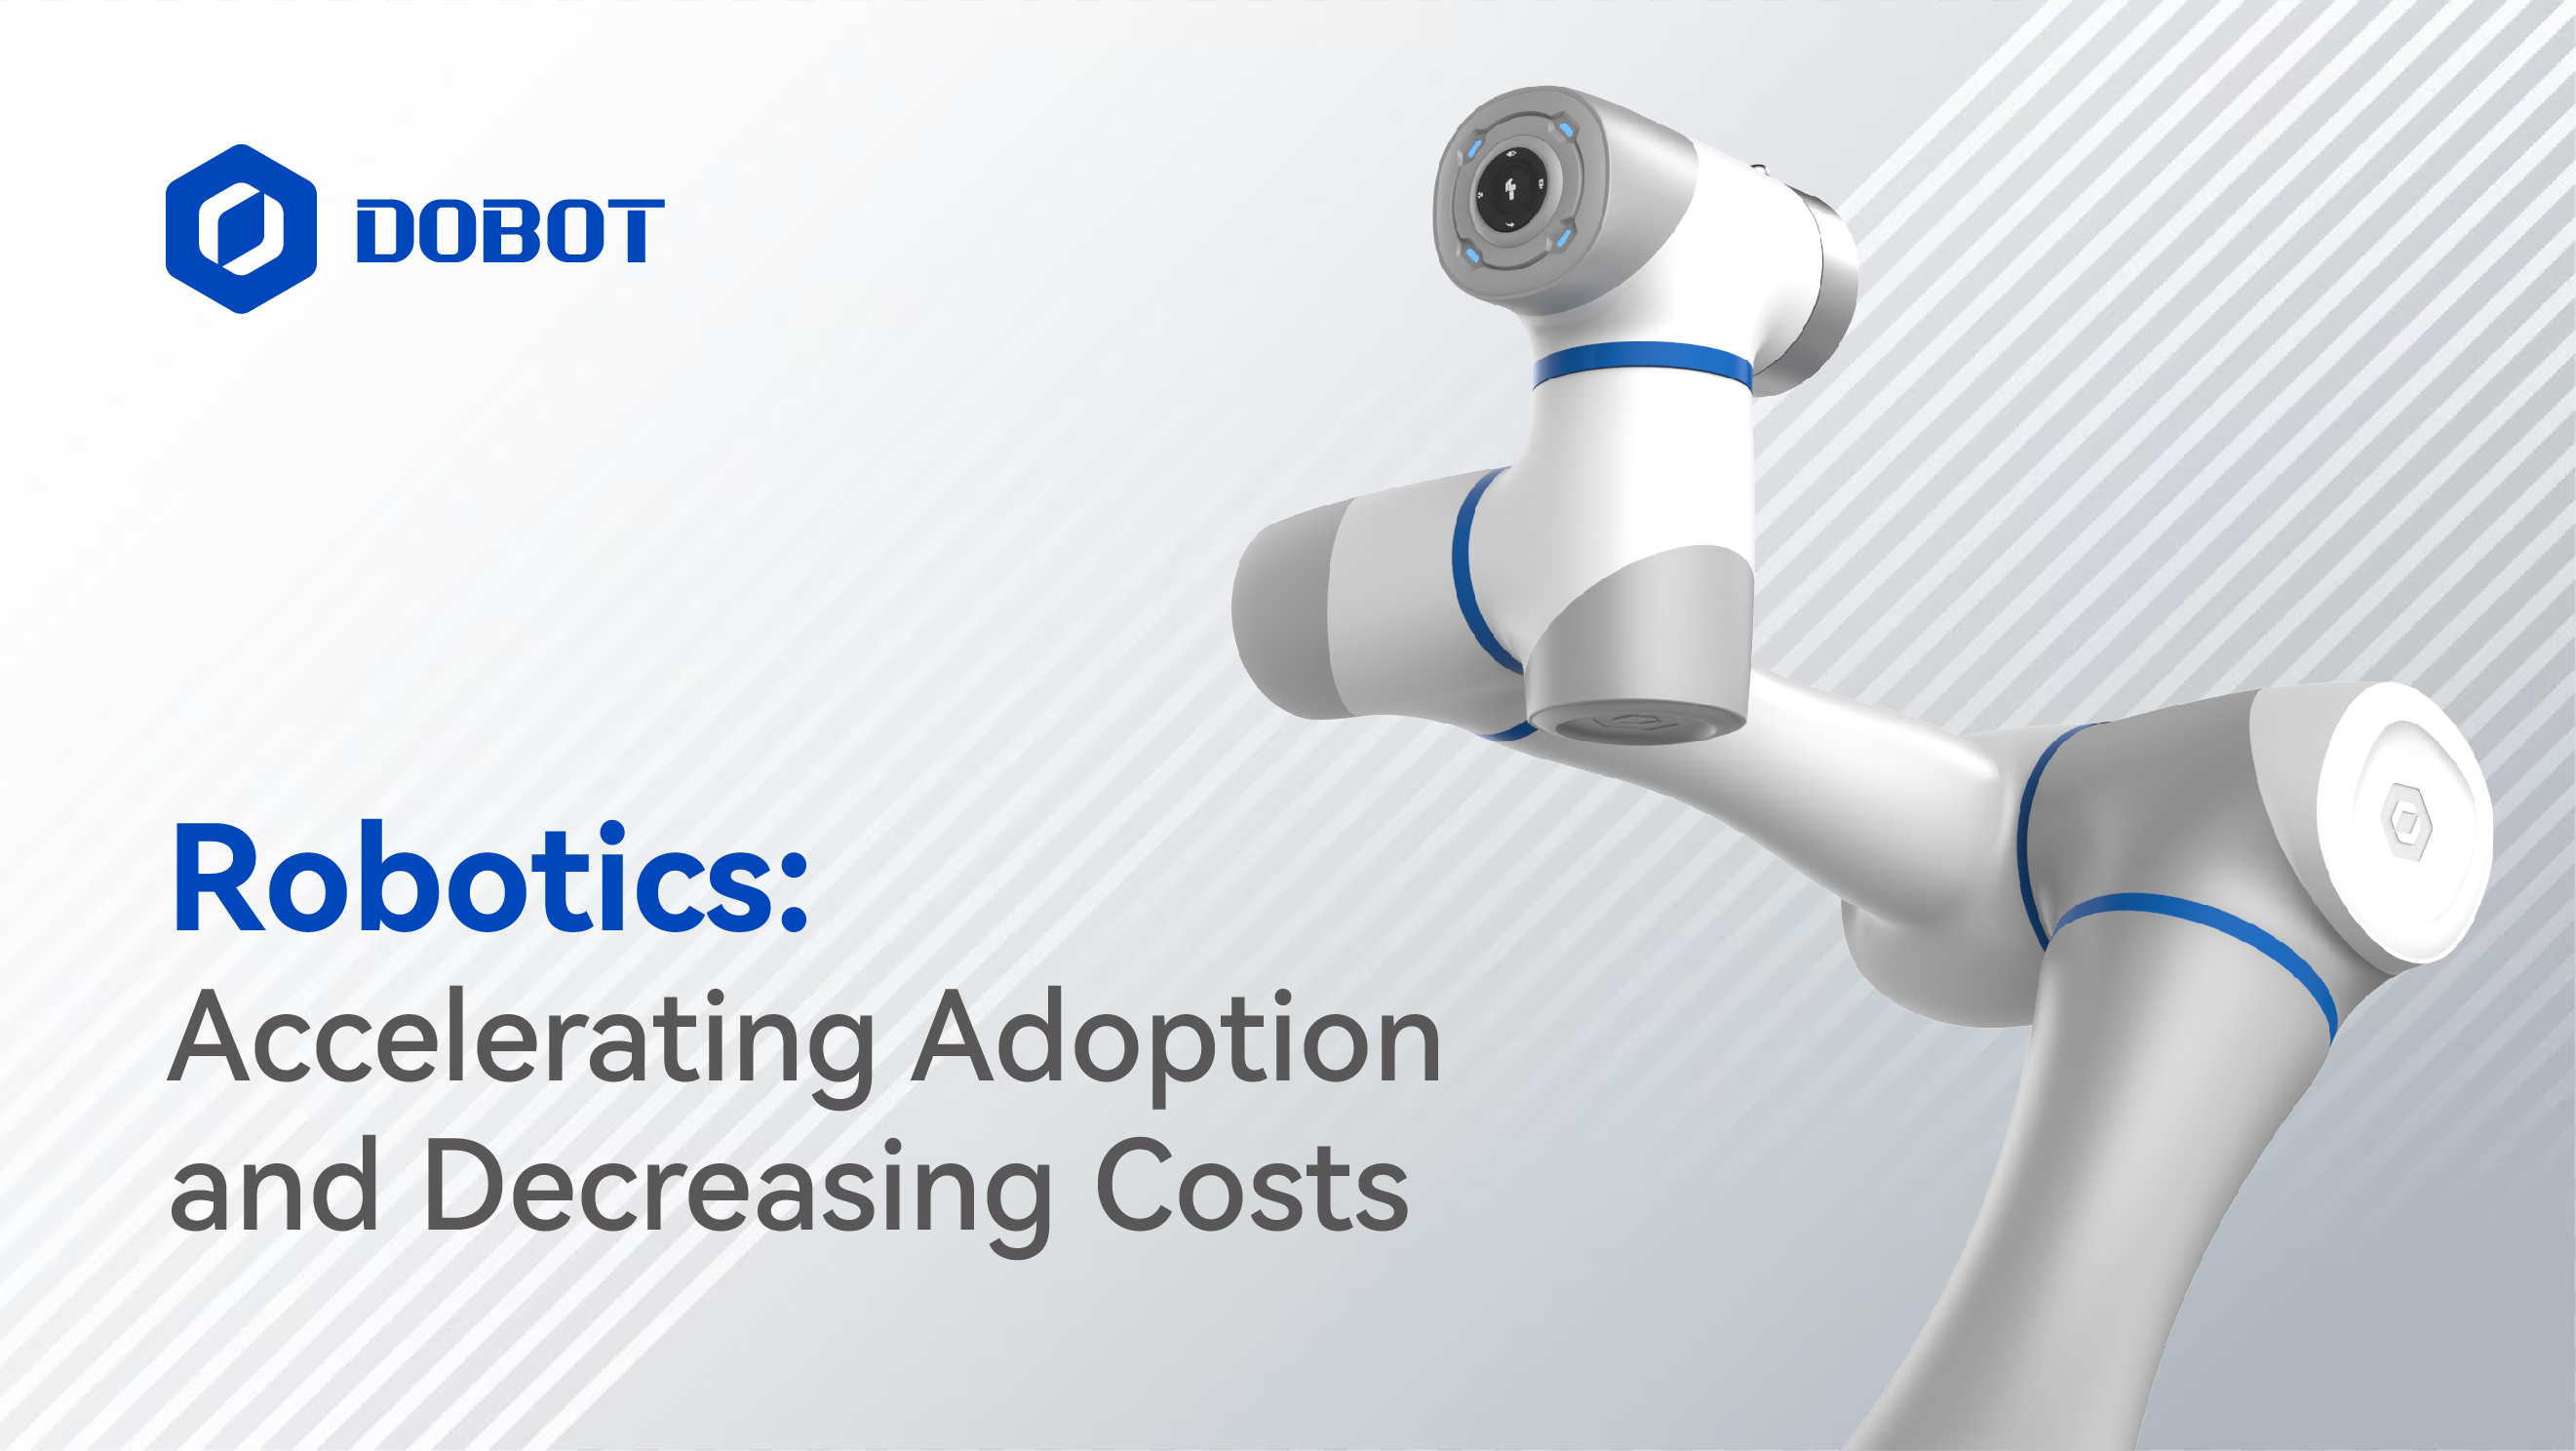 Robotics: Accelerating Adoption and Decreasing Costs - Insights from Ark Invest's Big Ideas 2023 Report